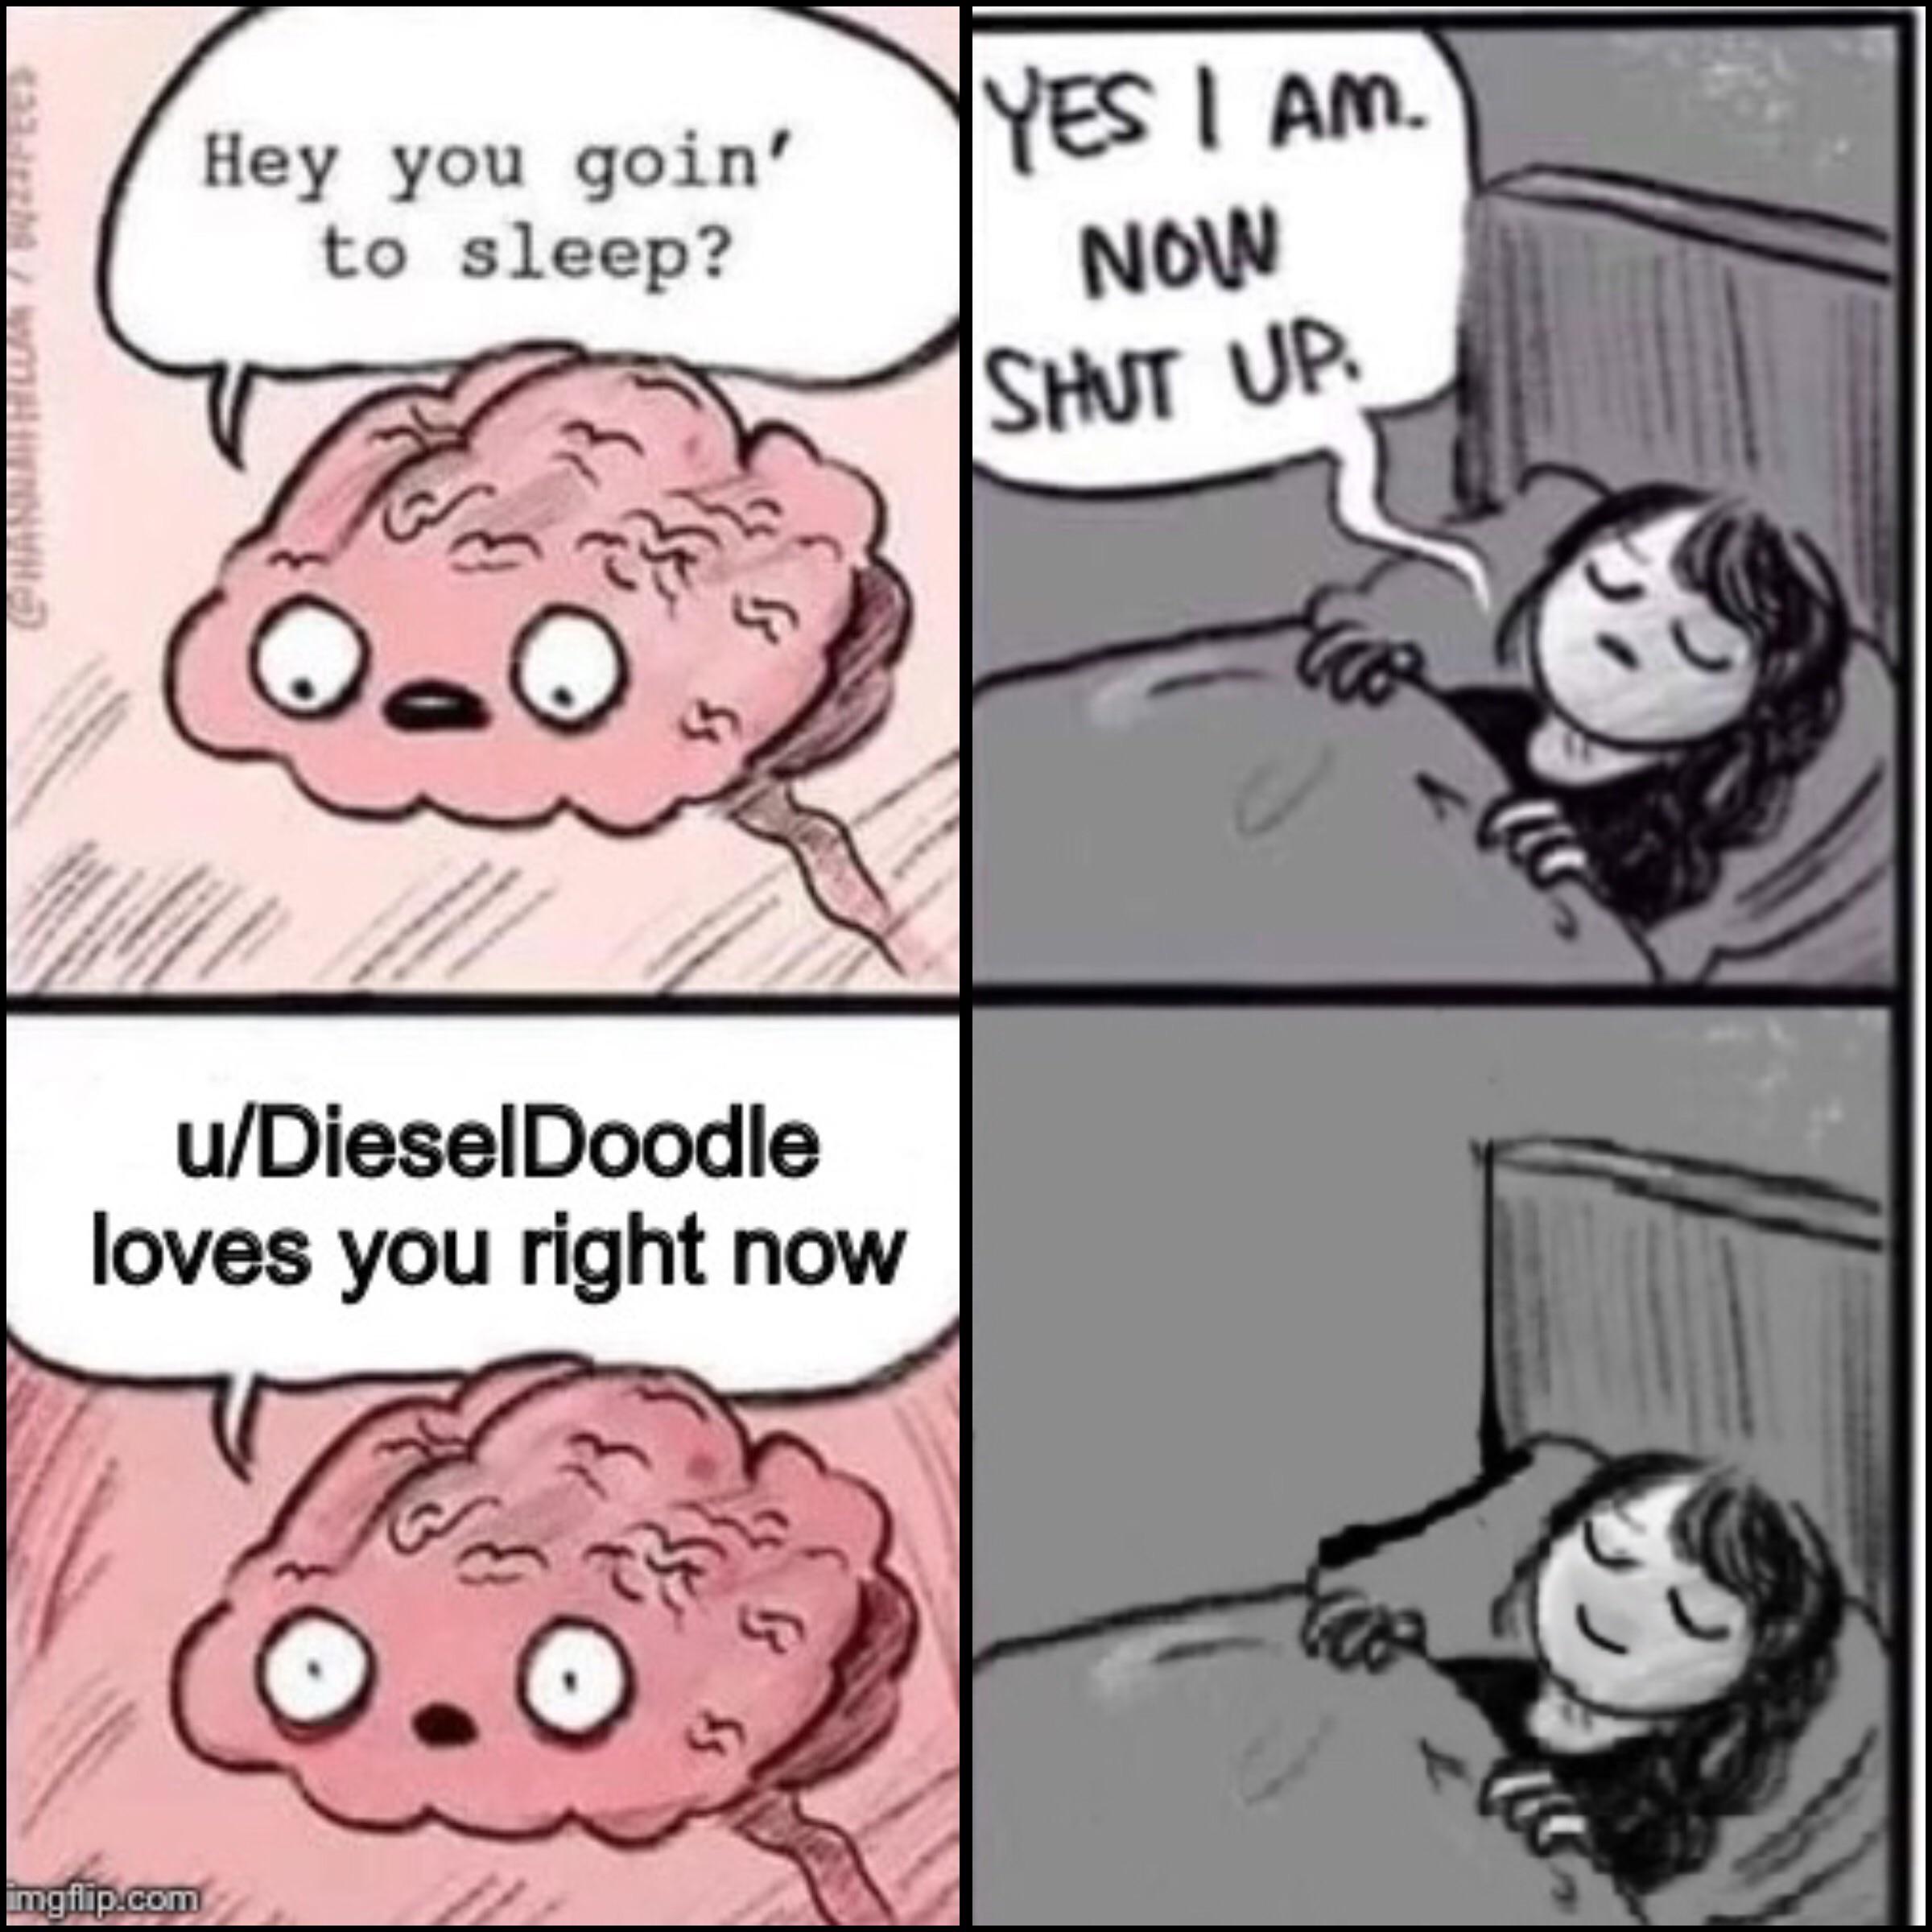 cute wholesome-memes cute text: Hey you goint to sleep? u/DieselDoodIe loves you right now YES I Am. NOW 